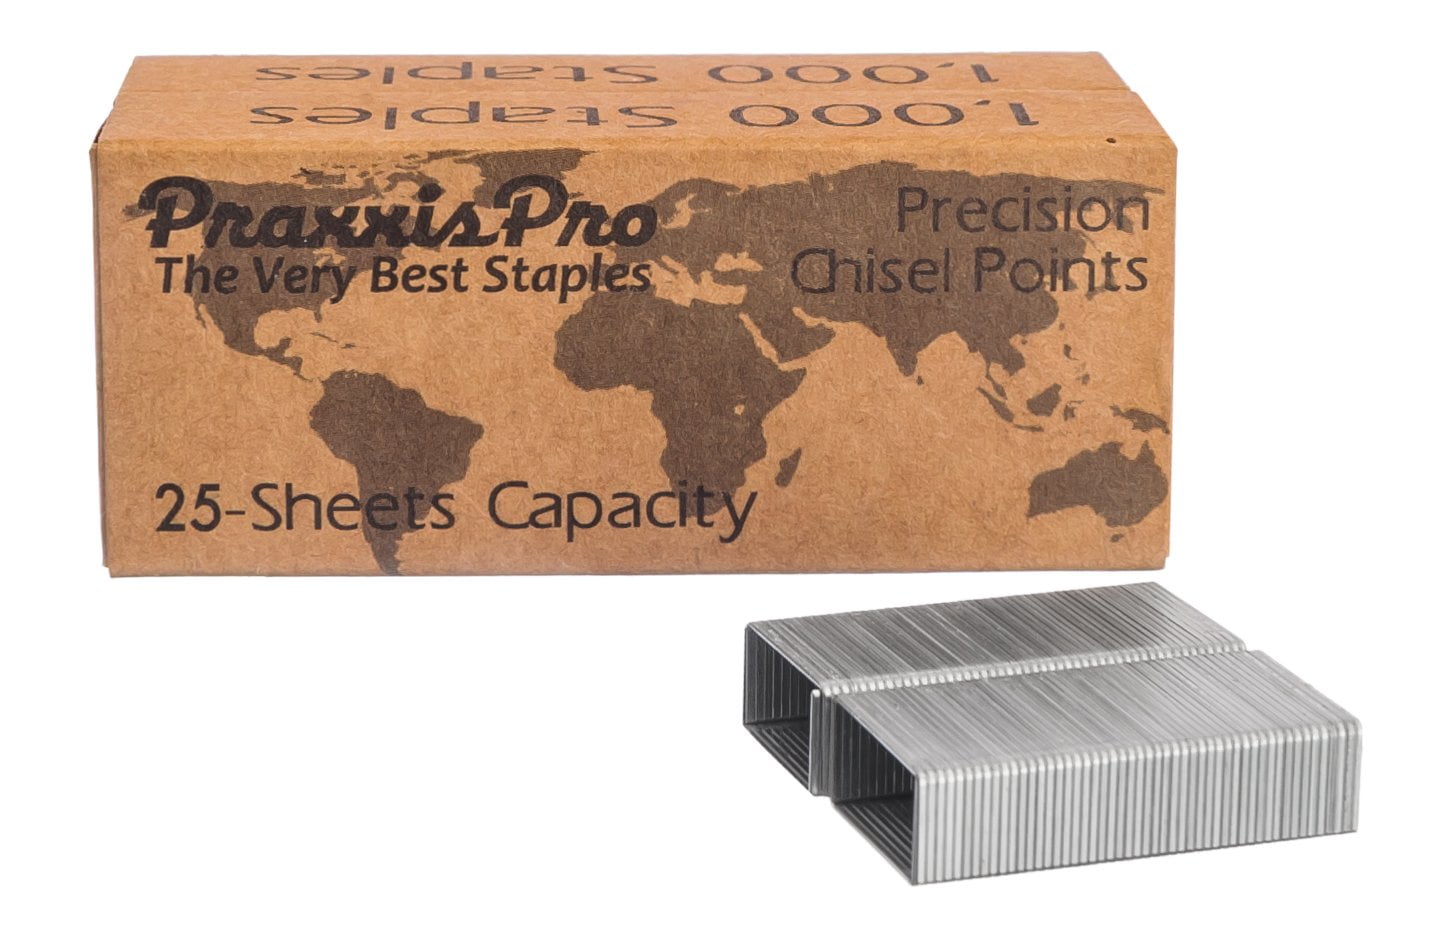 2000 X STAPLES JUST STATIONARY 26/6 DURABLE STAPLES ORIGINAL PACKAGING.